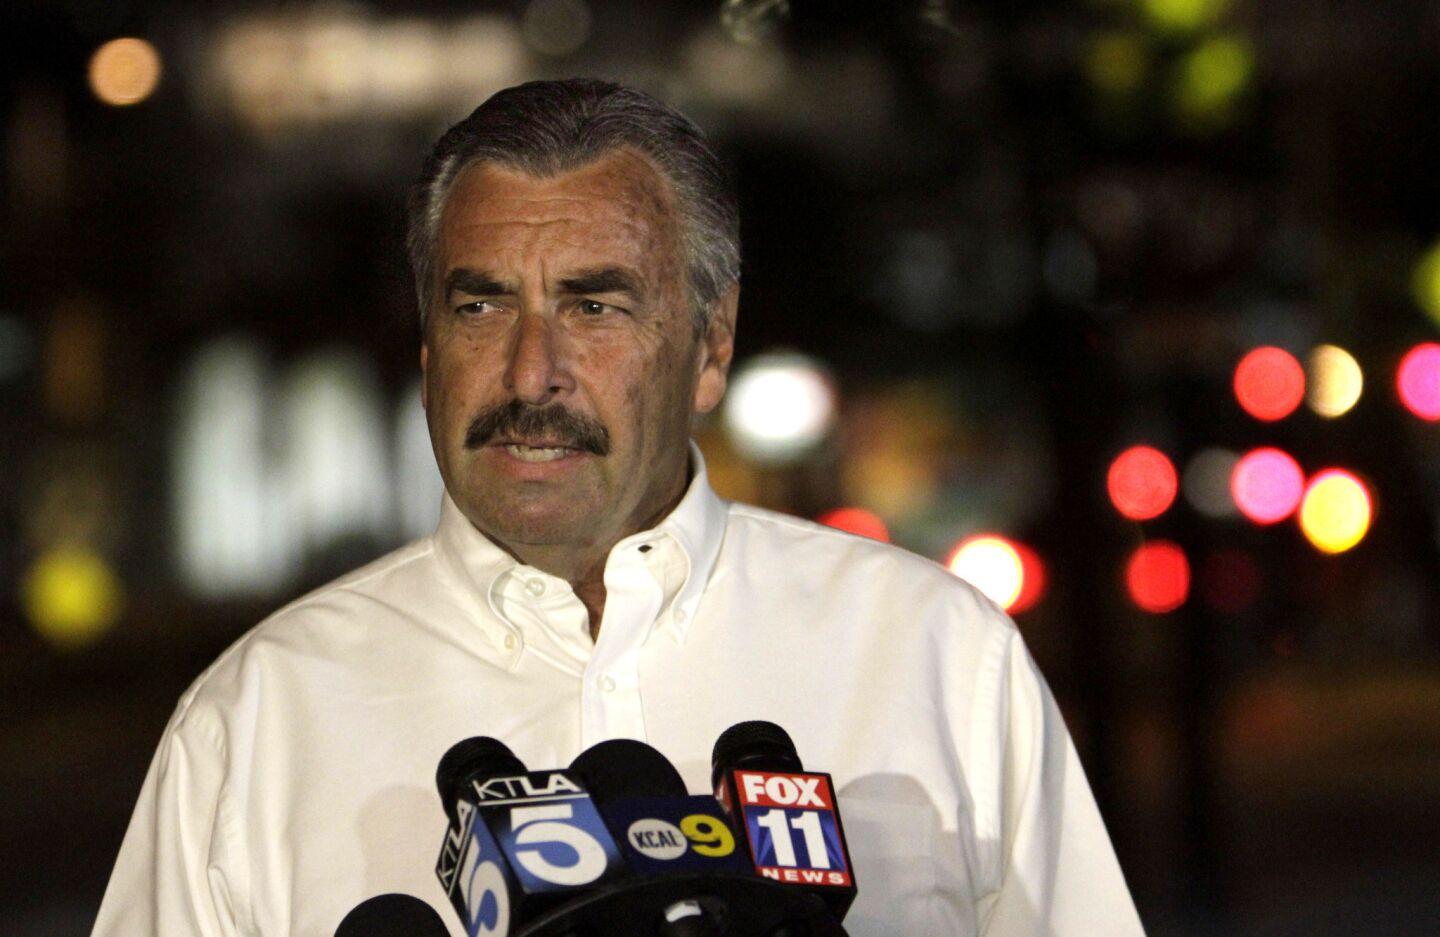 LAPD Chief Charlie Beck speaks to the media about the condition of the injured officer at Cedars-Sinai Medical Center on Monday night. "He is in great spirits," Beck said. He described the officer as a "remarkable young man" who was "very, very lucky."